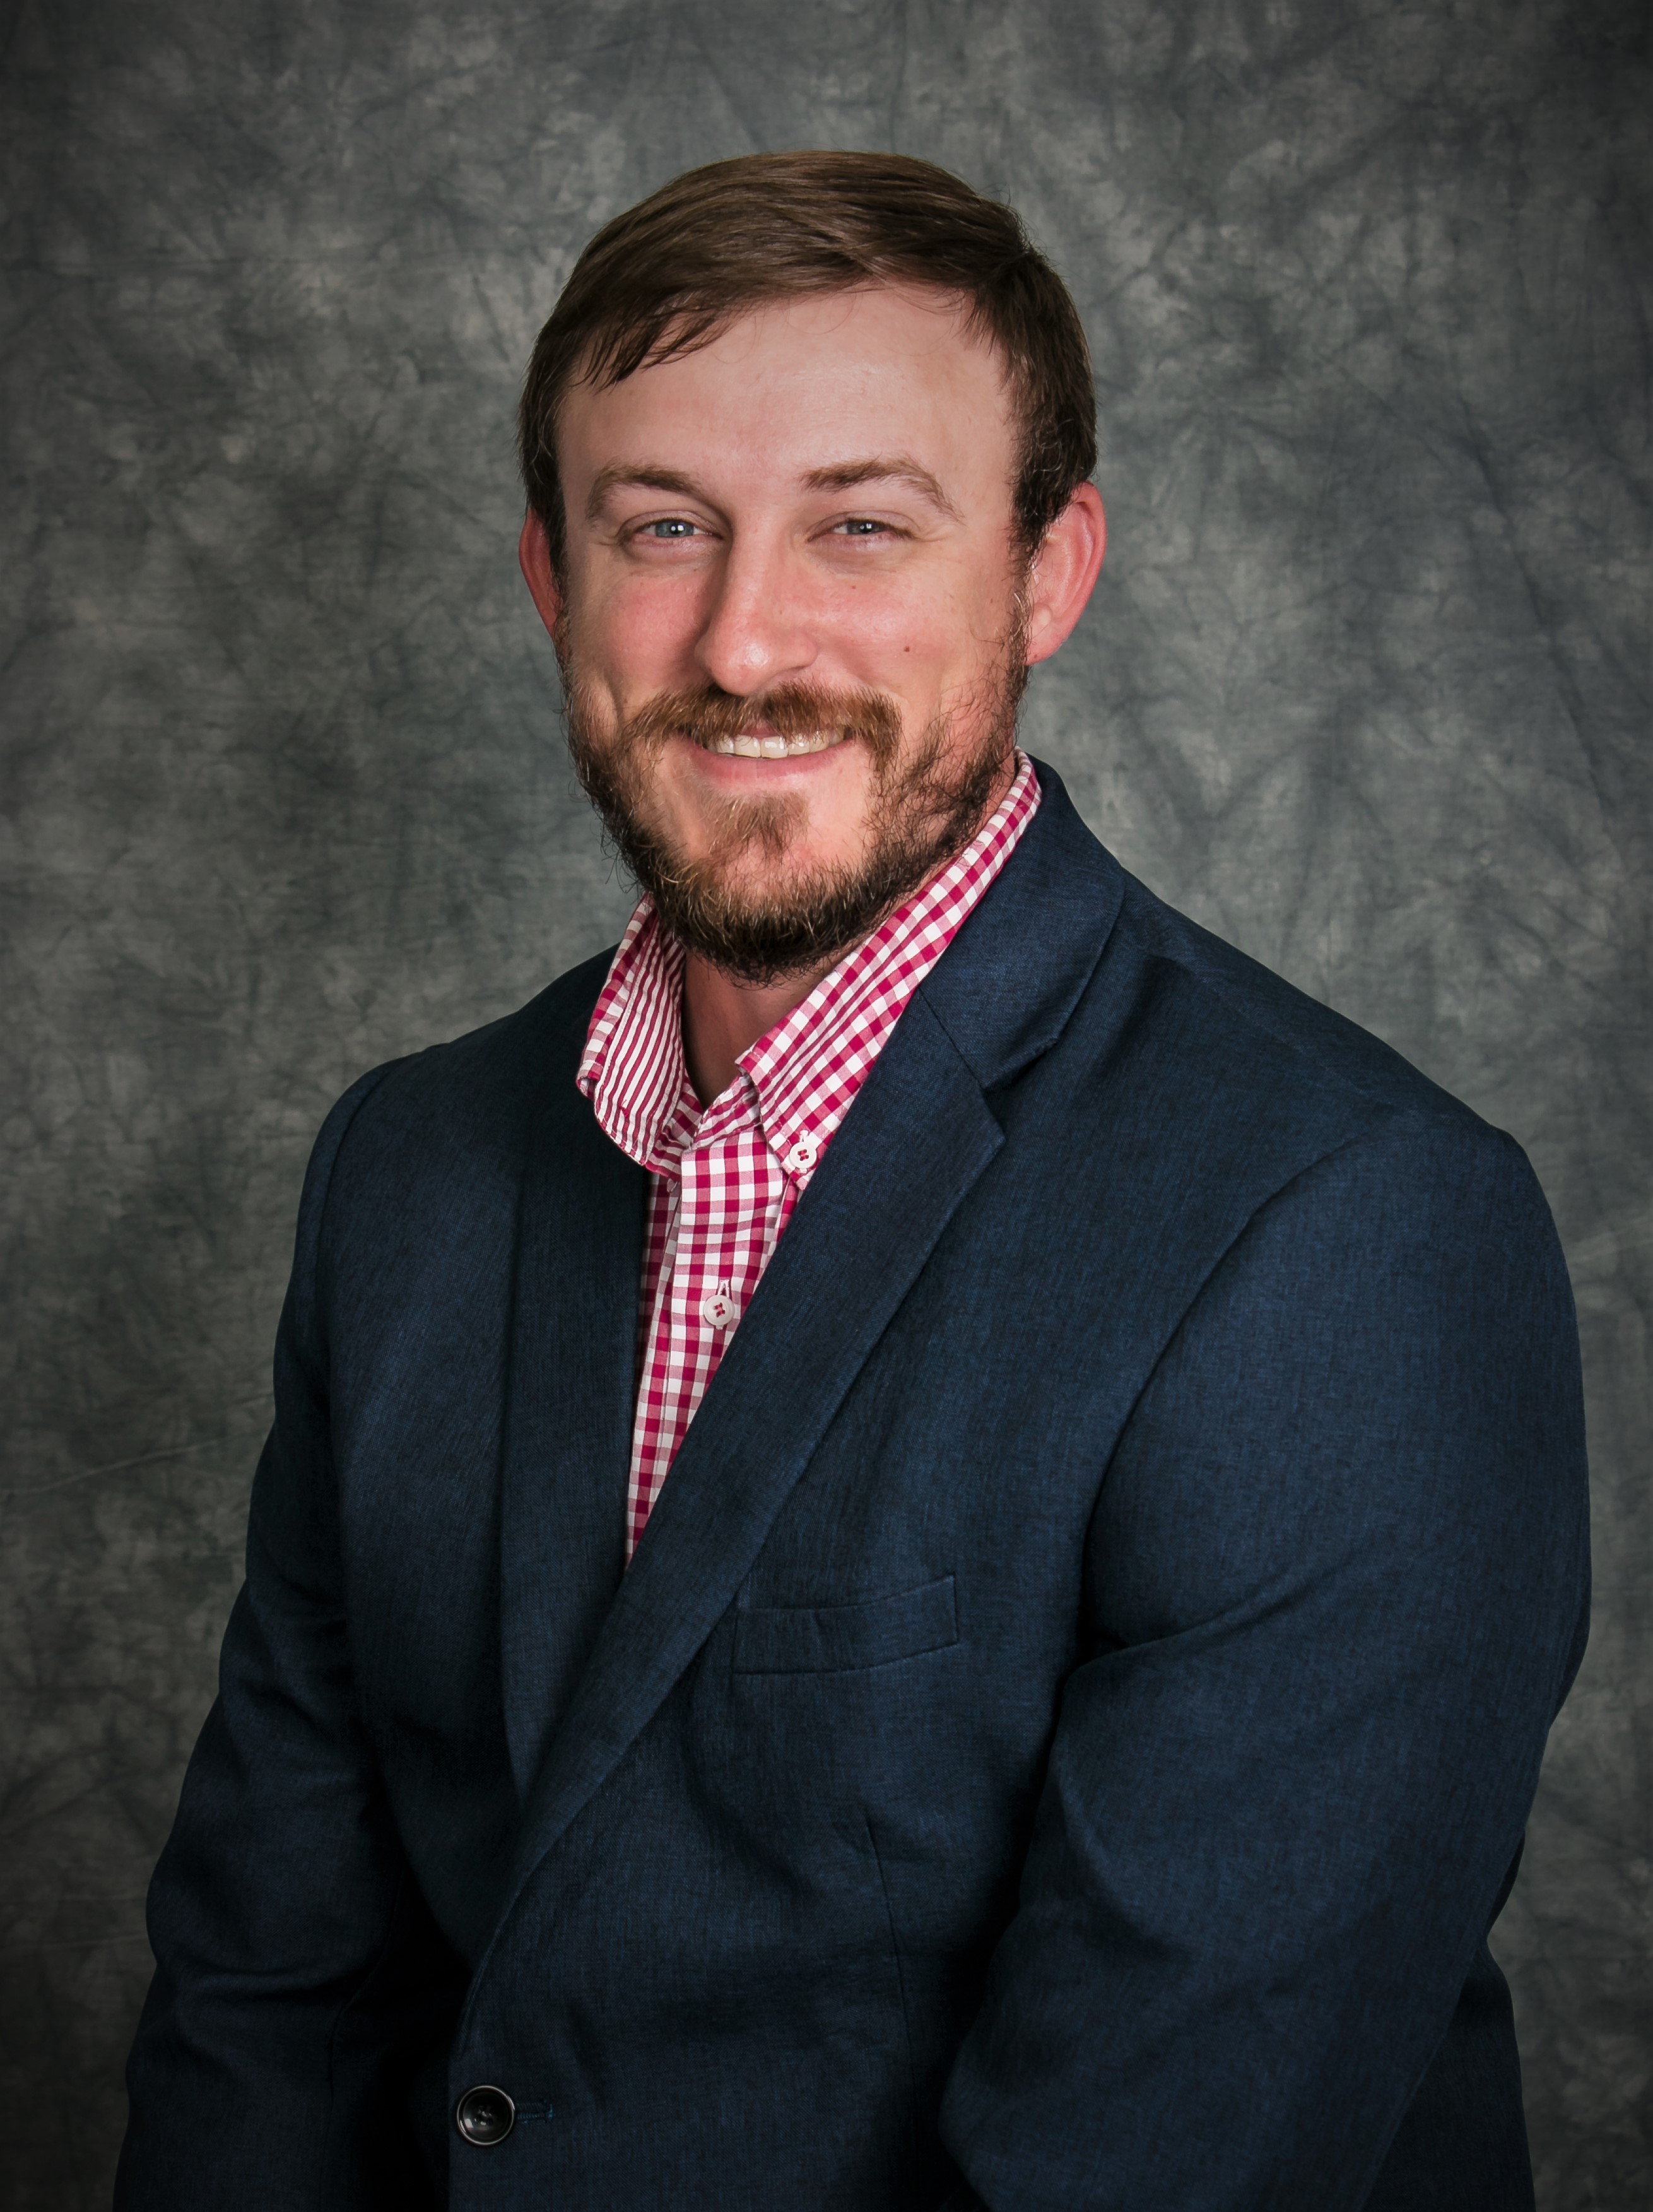 Banner picture of Dylan McCollough,  CRNP smiling. Banner says:

Elba Healthcare
918 Drayton Avenue 
Elba, AL 36323
334-493-5713 

Accepting New Patients
Walk-Ins Welcome
Call today to make your appointment!